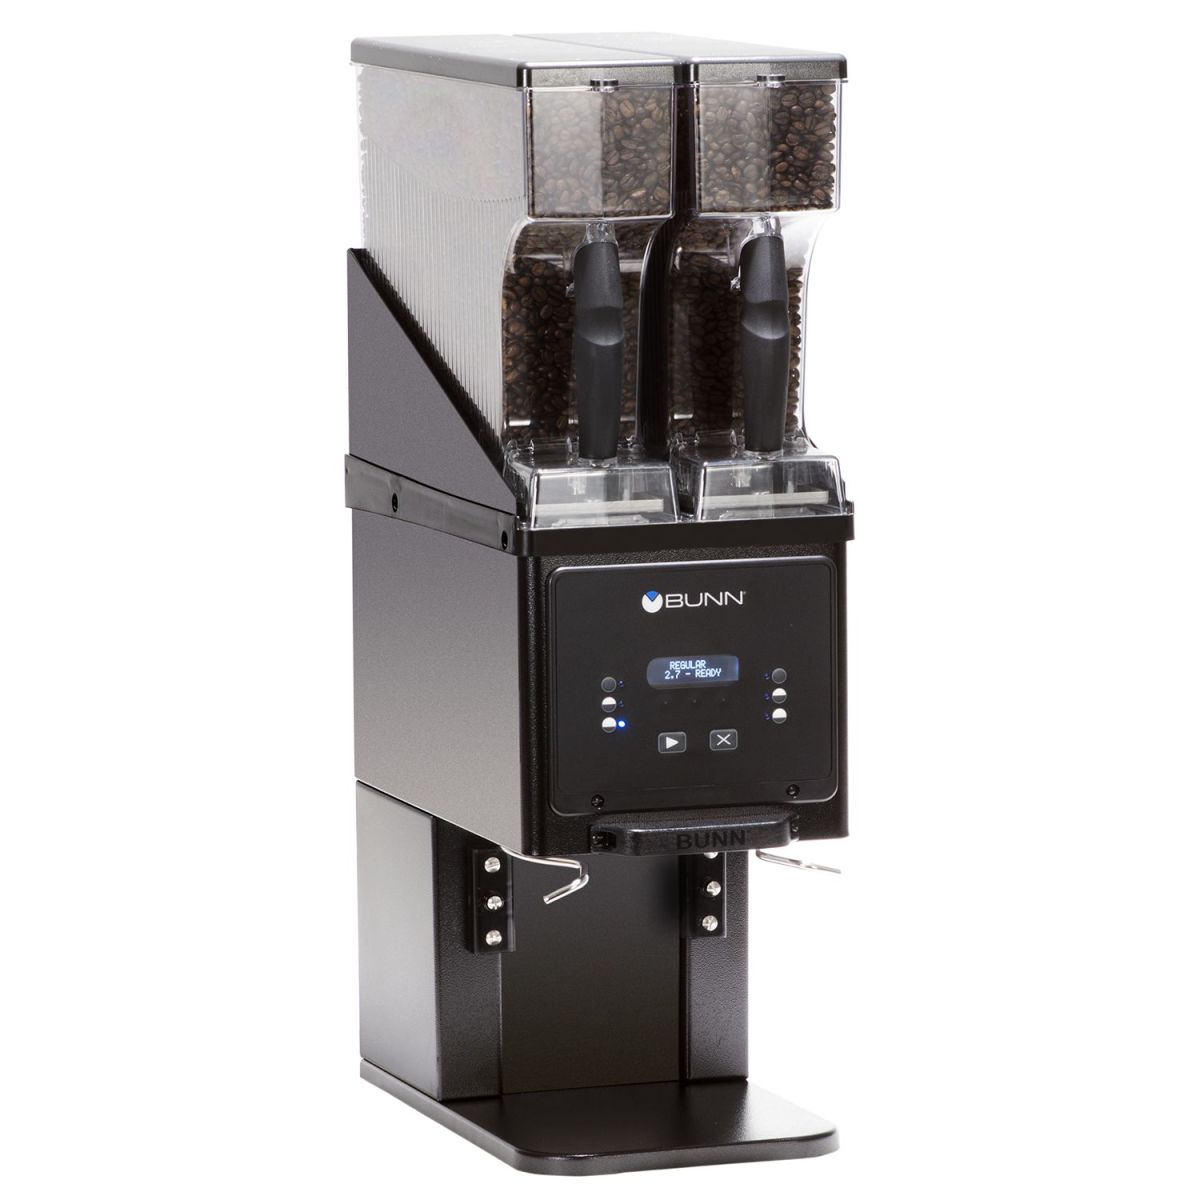 Bunn commercial coffee grinder $450 ⋆ Moonlight Kitchens